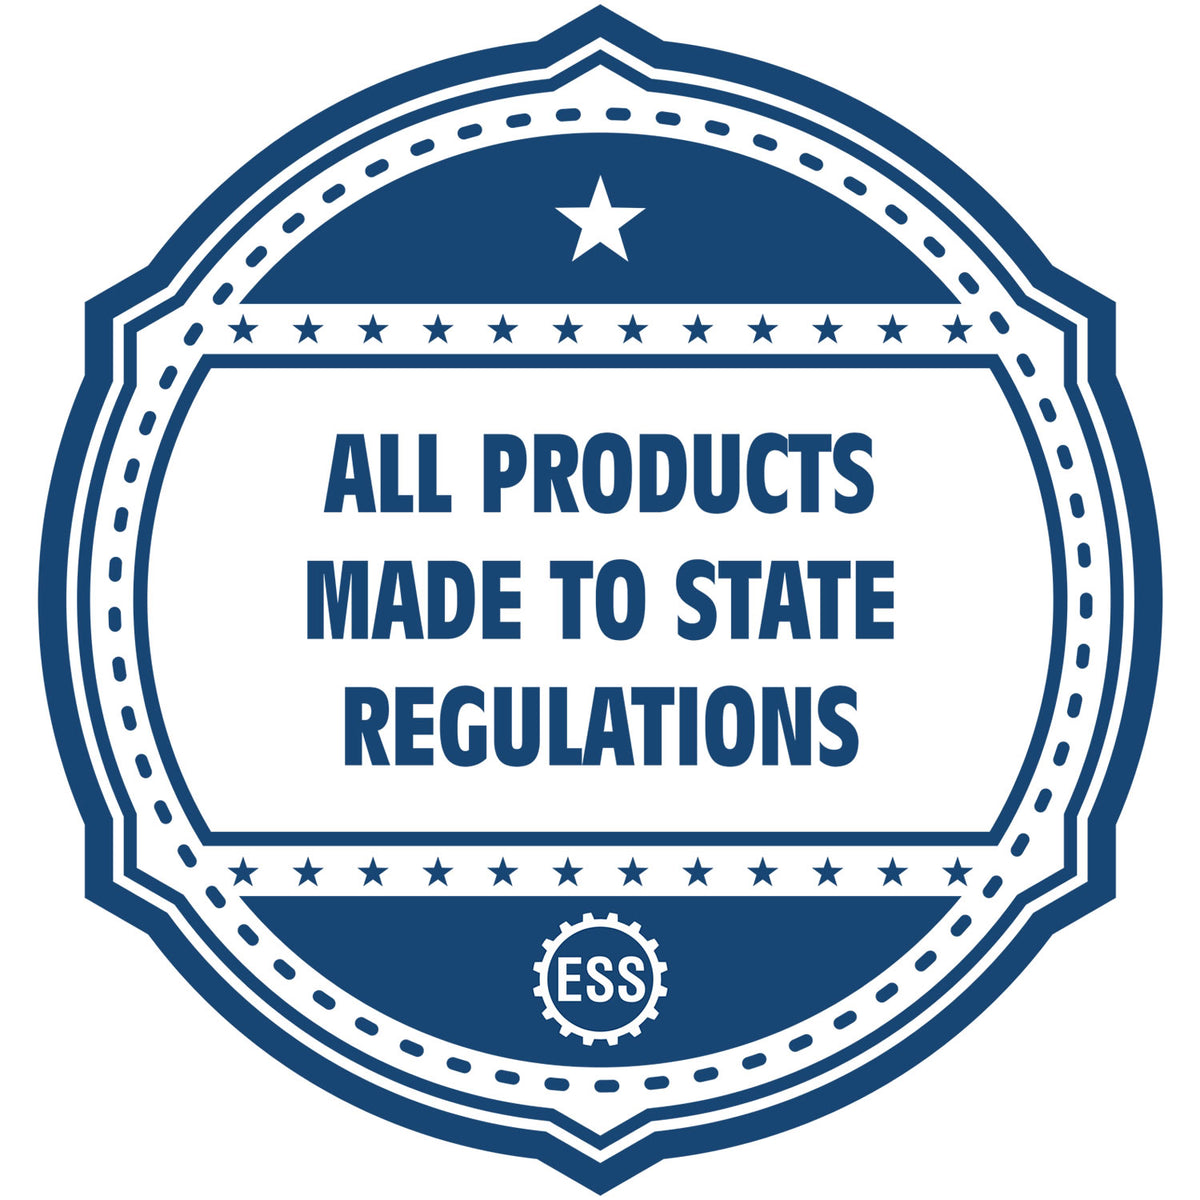 An icon or badge element for the Arkansas Desk Surveyor Seal Embosser showing that this product is made in compliance with state regulations.